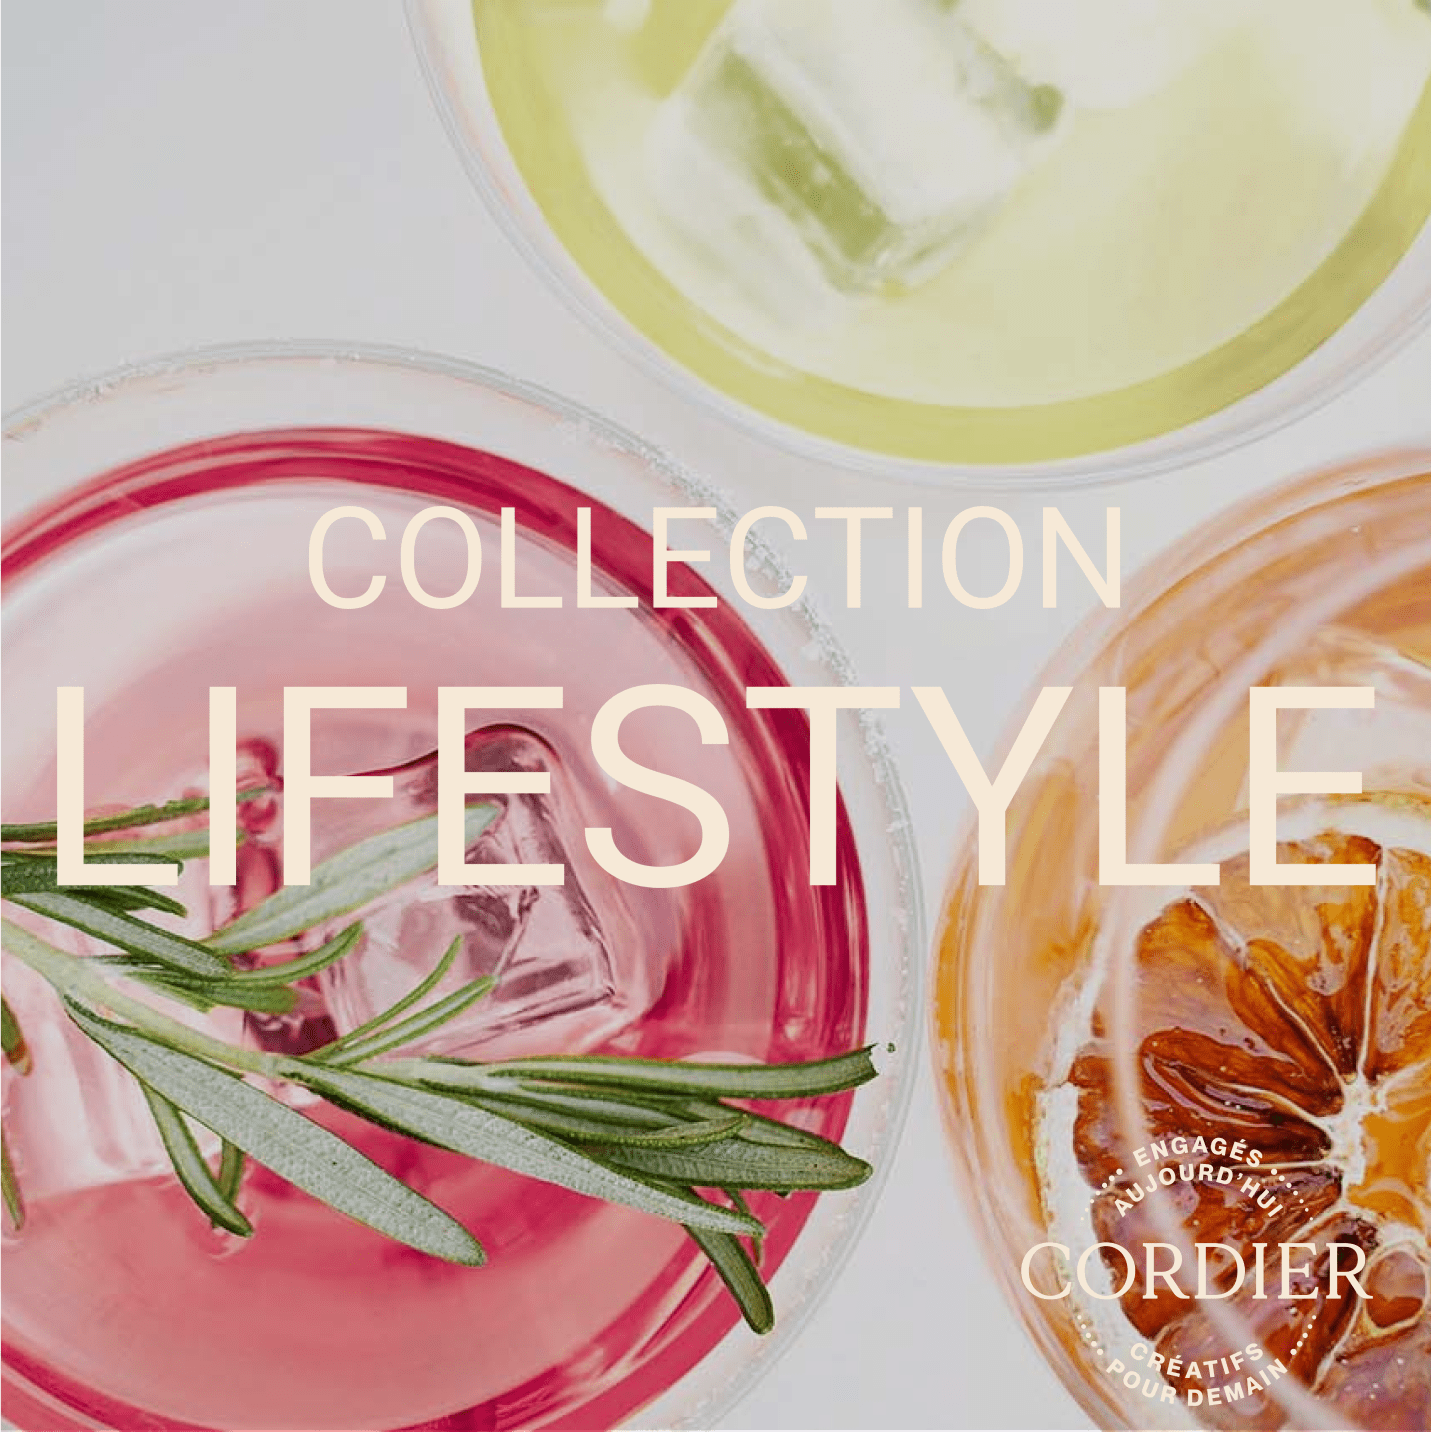 Cordier Collection Lifestyle